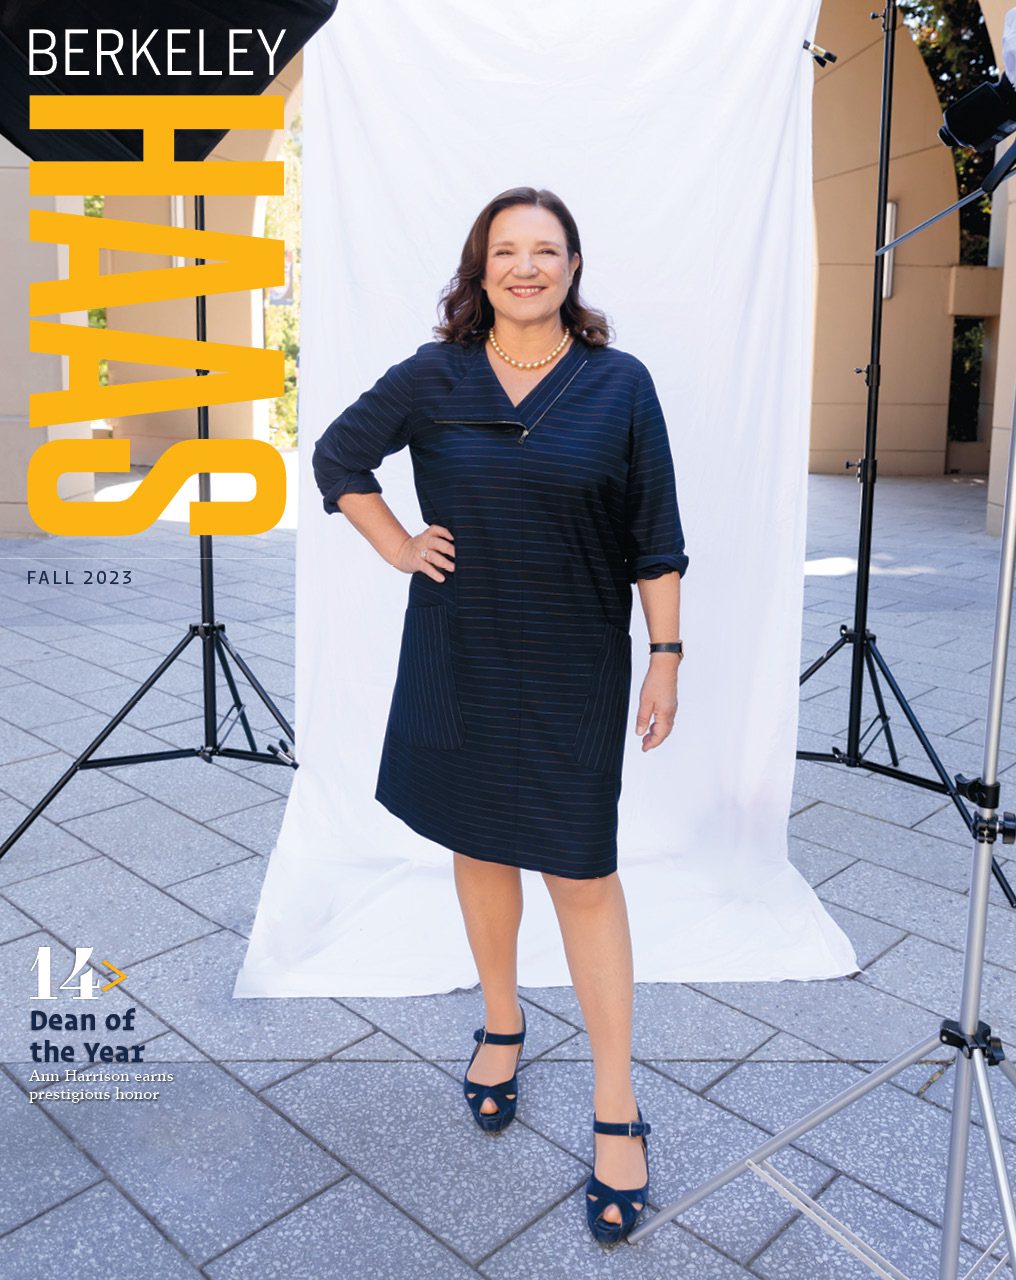 Magazine cover image of Dean Ann Harrison at an on-campus photo shoot with a white screen behind her.